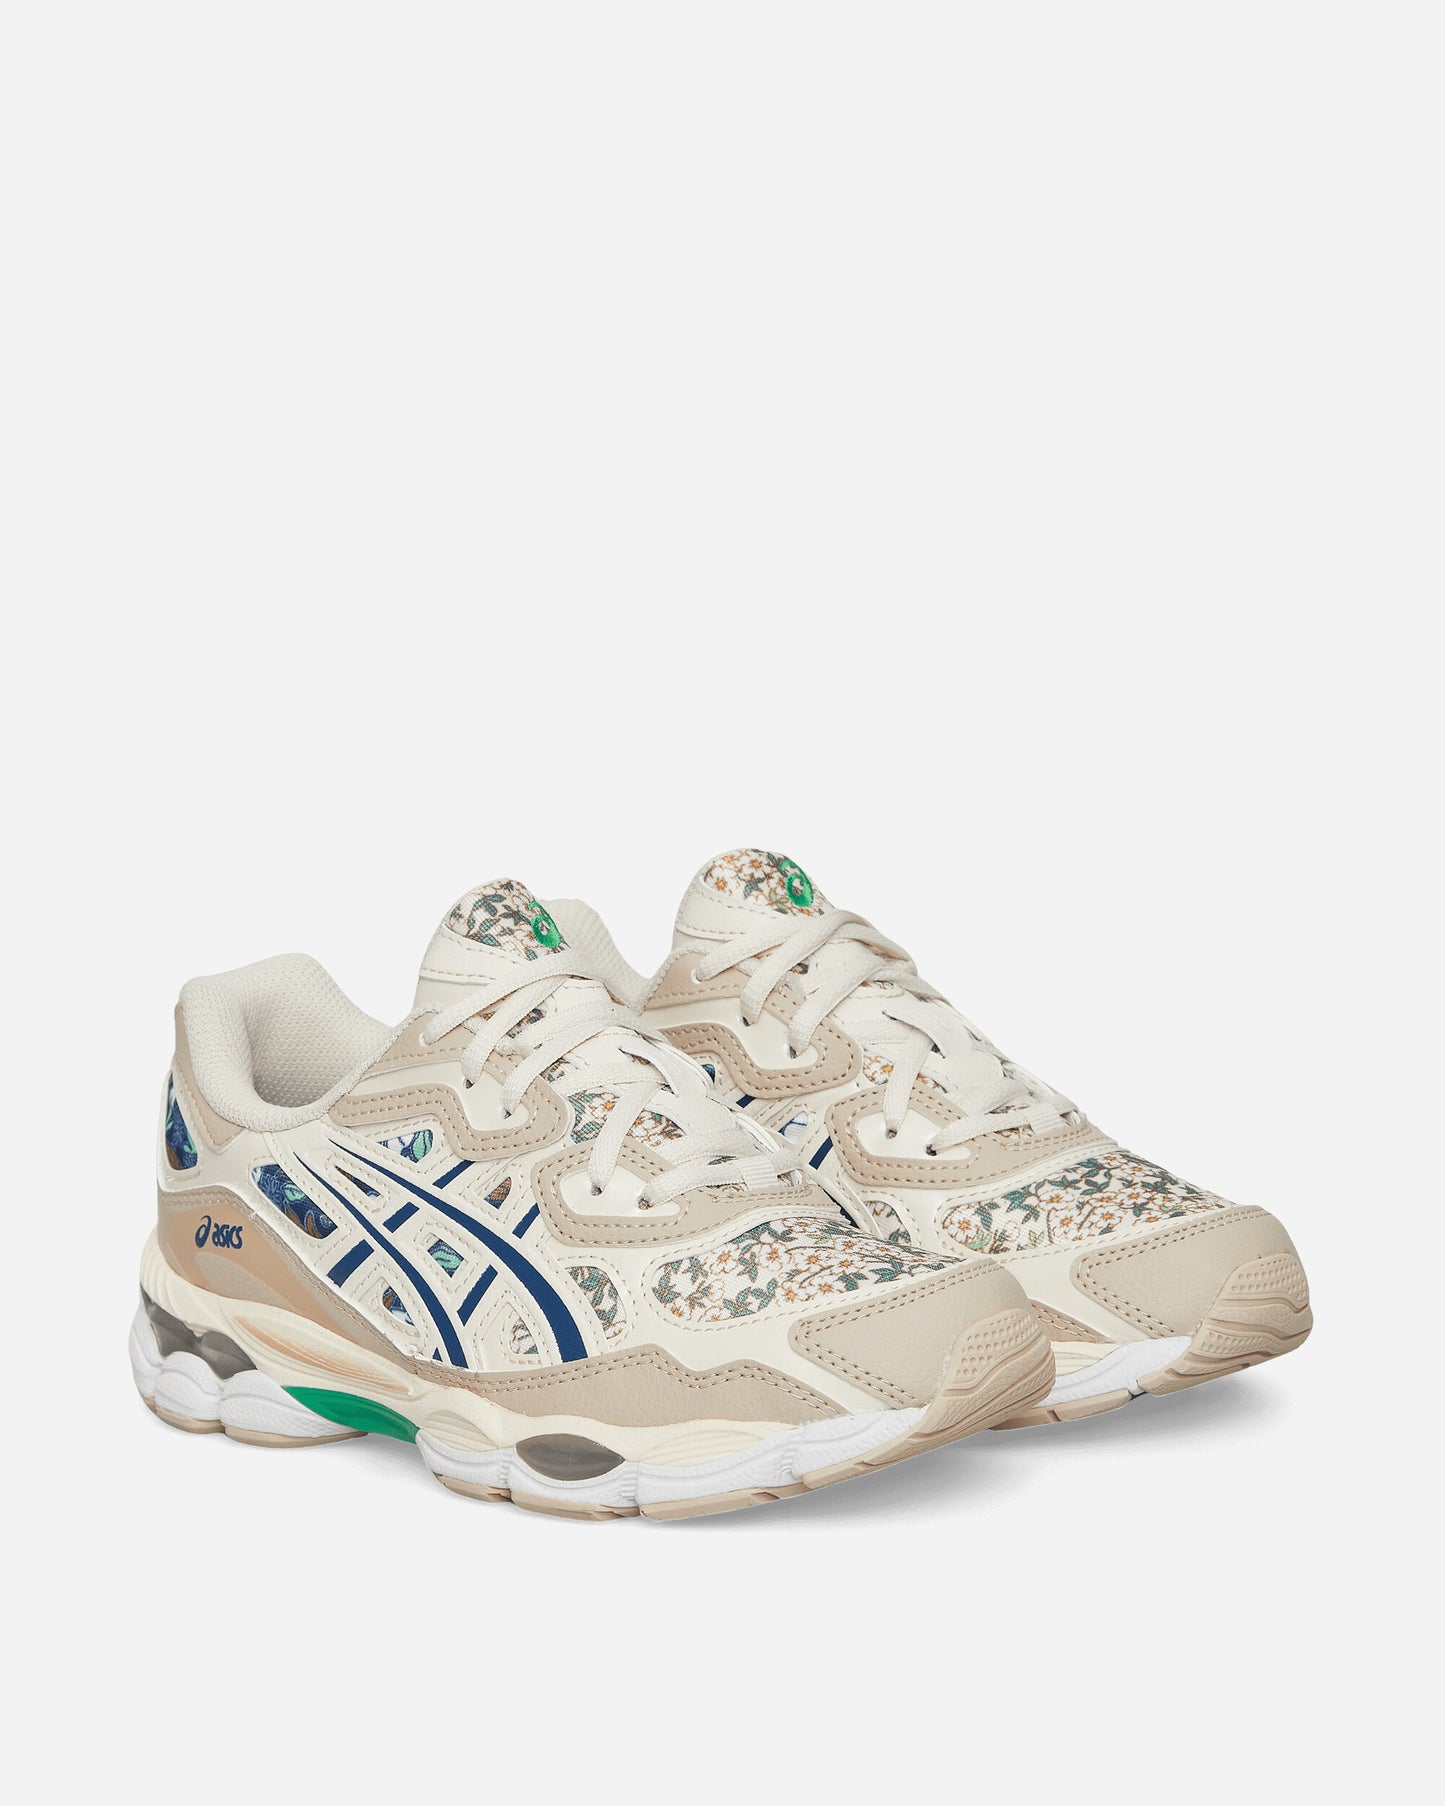 Asics Wmns Gel-Nyc Oatmeal/Simply Taupe Sneakers Low 1202A441-250